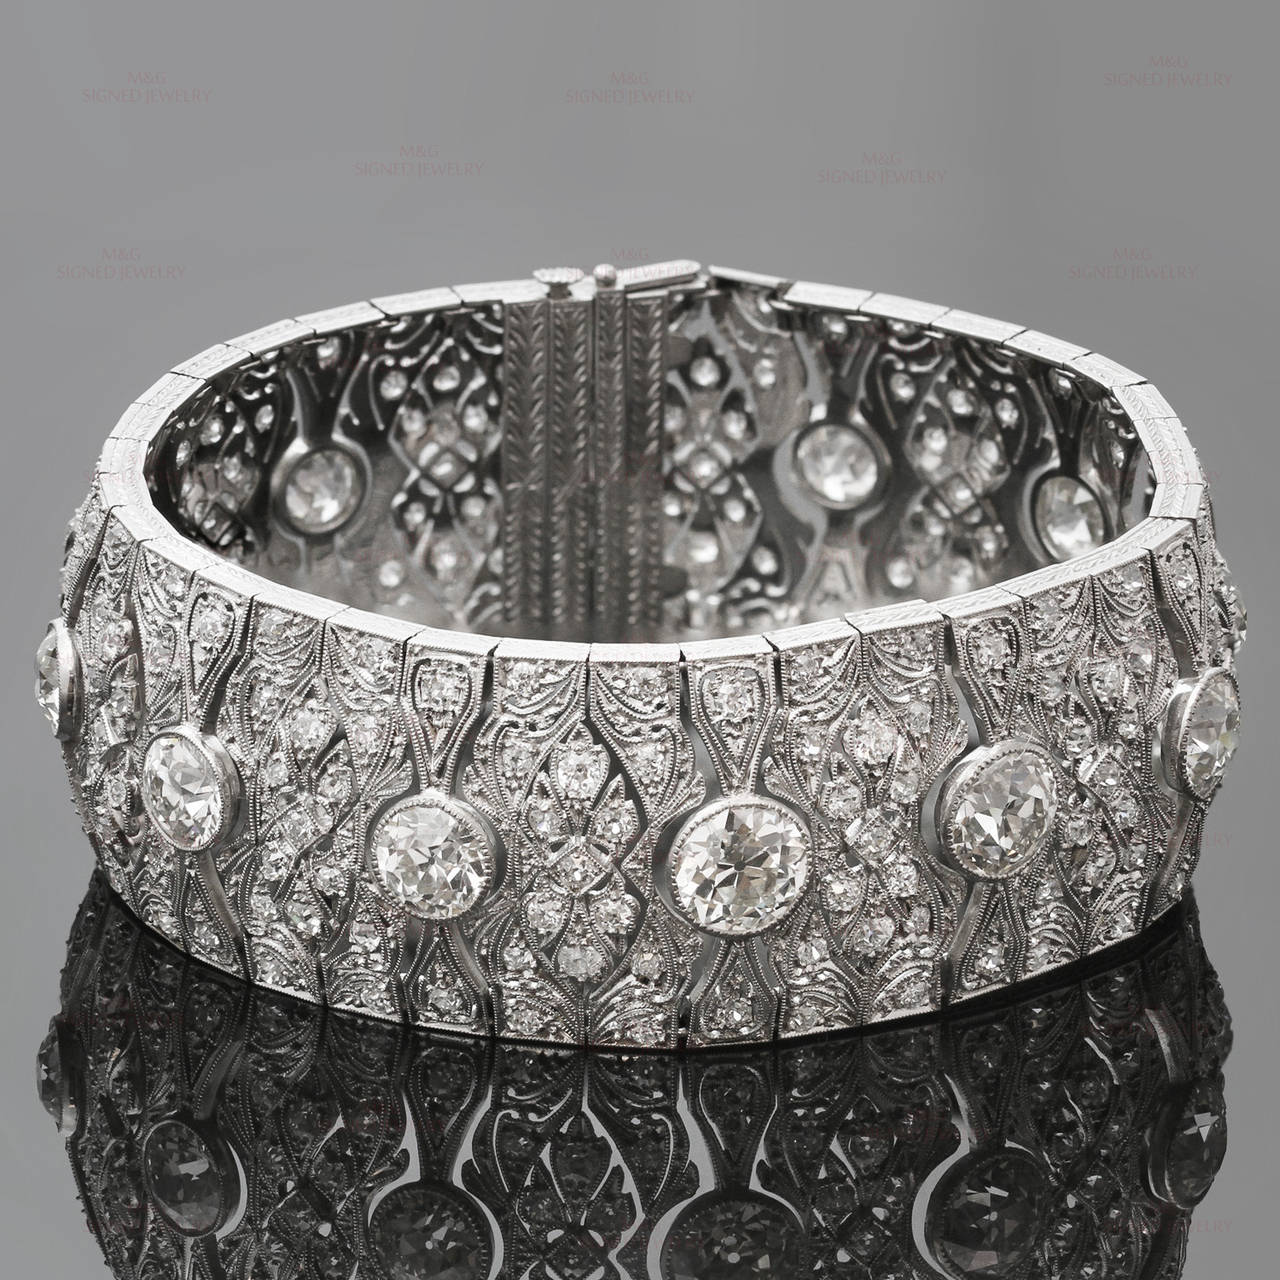 This stunning antique 1920s bracelet features an elegant filigree design hand-crafted in platinum and set with 12 large old-mine diamonds of mostly VS and some SI1 clarity weighing an estimated 16.50 carats and 204 small round diamonds of mostly